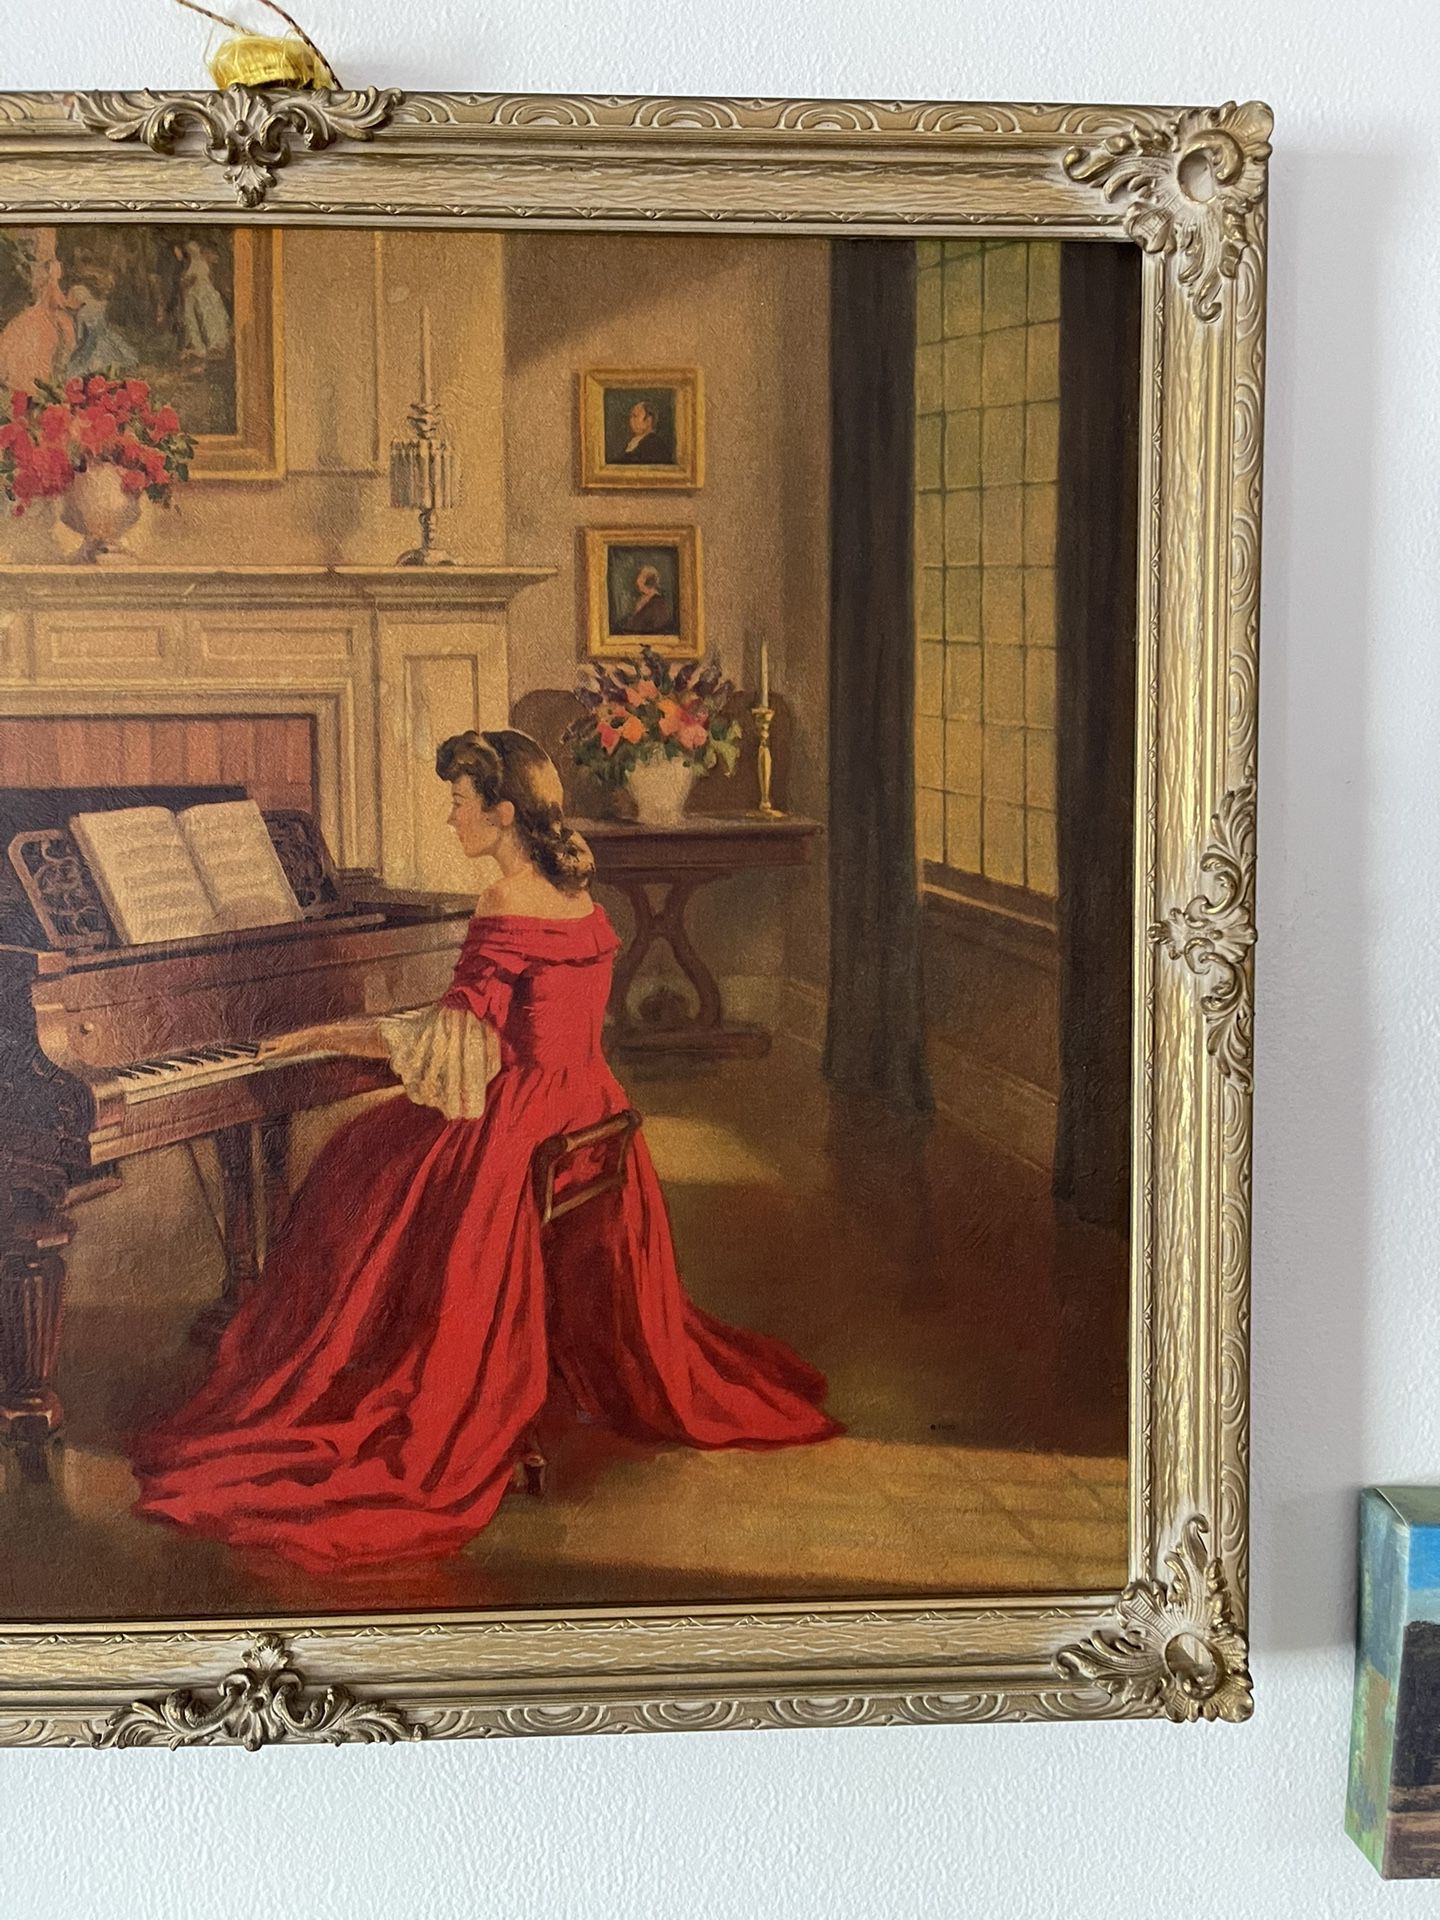 Antique Framed Wall Hanging Sonata TMCO Lithograph, of Painting By M. Ditlef Sonata Lady In Red Dress